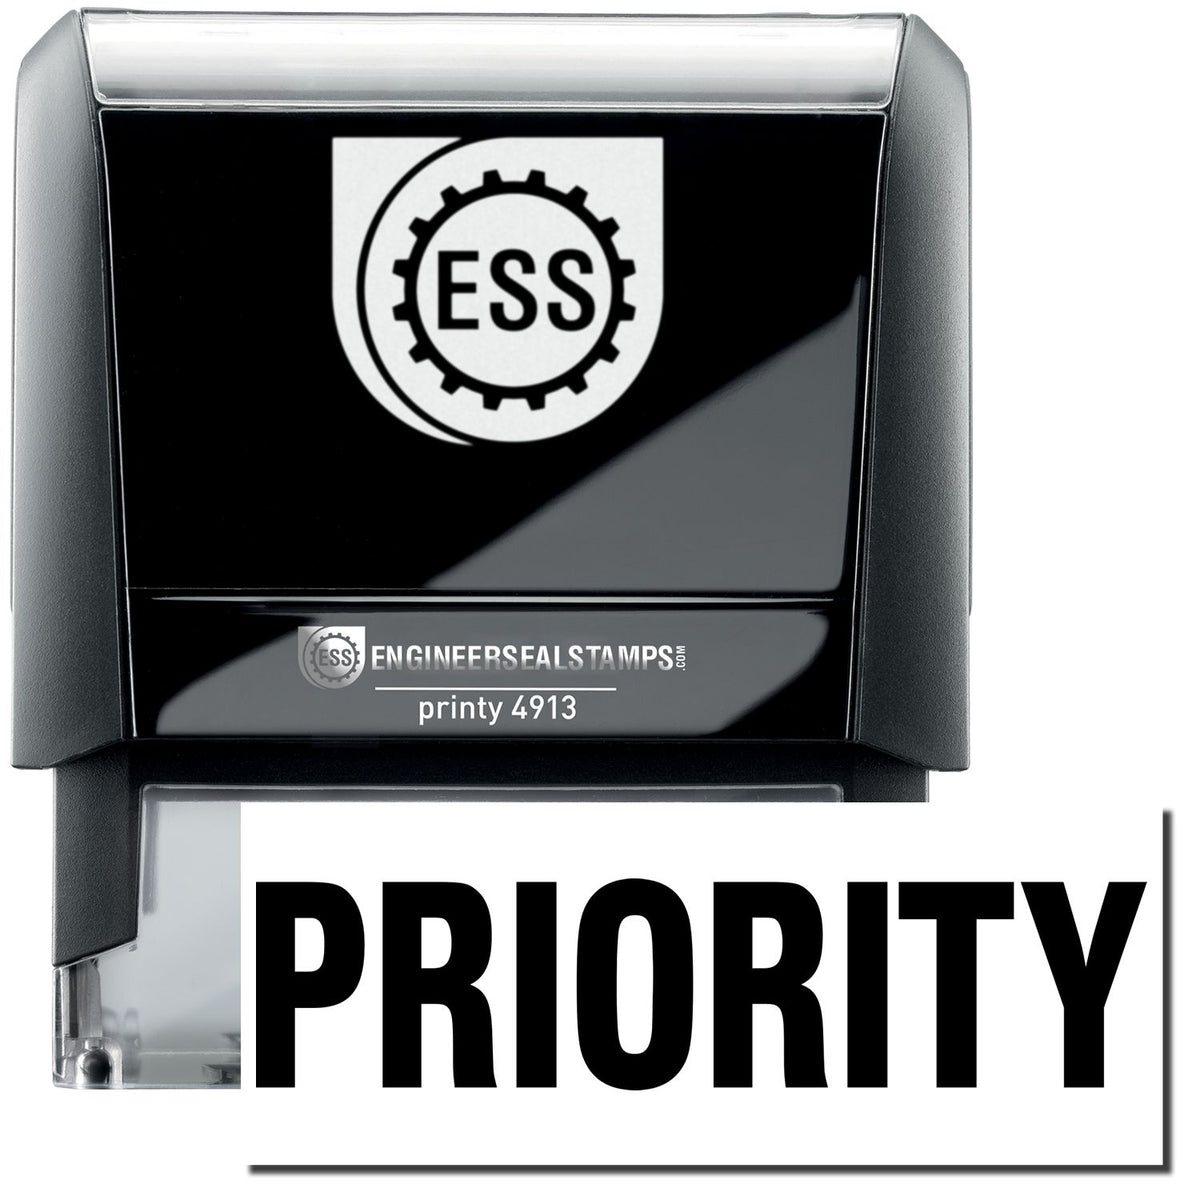 A self-inking stamp with a stamped image showing how the text &quot;PRIORITY&quot; in a large bold font is displayed by it after stamping.